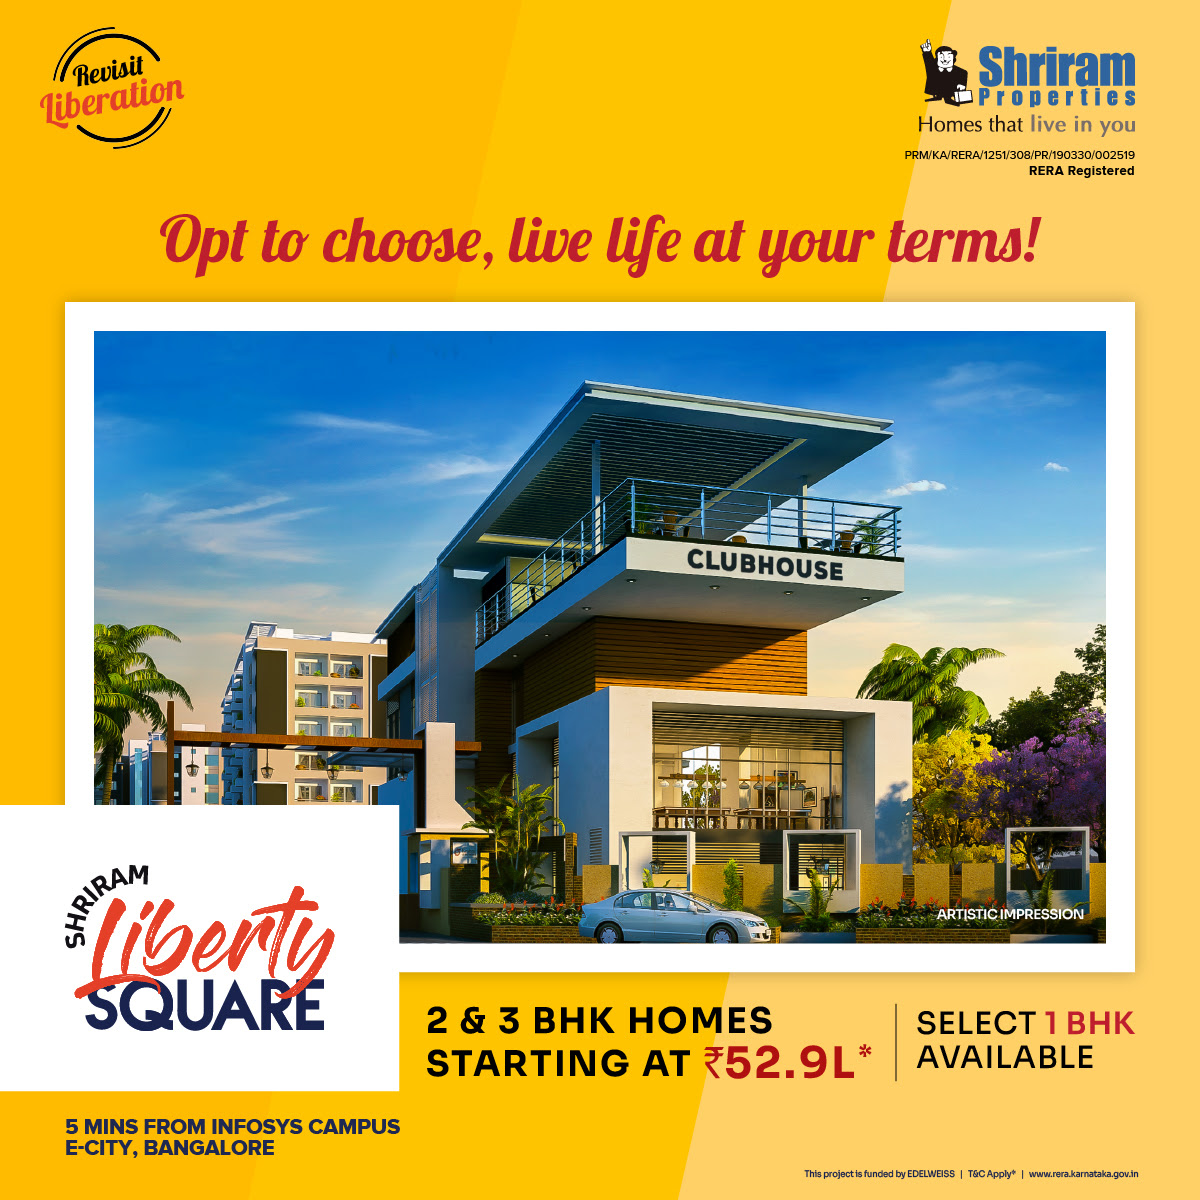 Book 2 and 3 BHK home starting Rs 52.9 Lac at Shriram Liberty Square, Bangalore Update